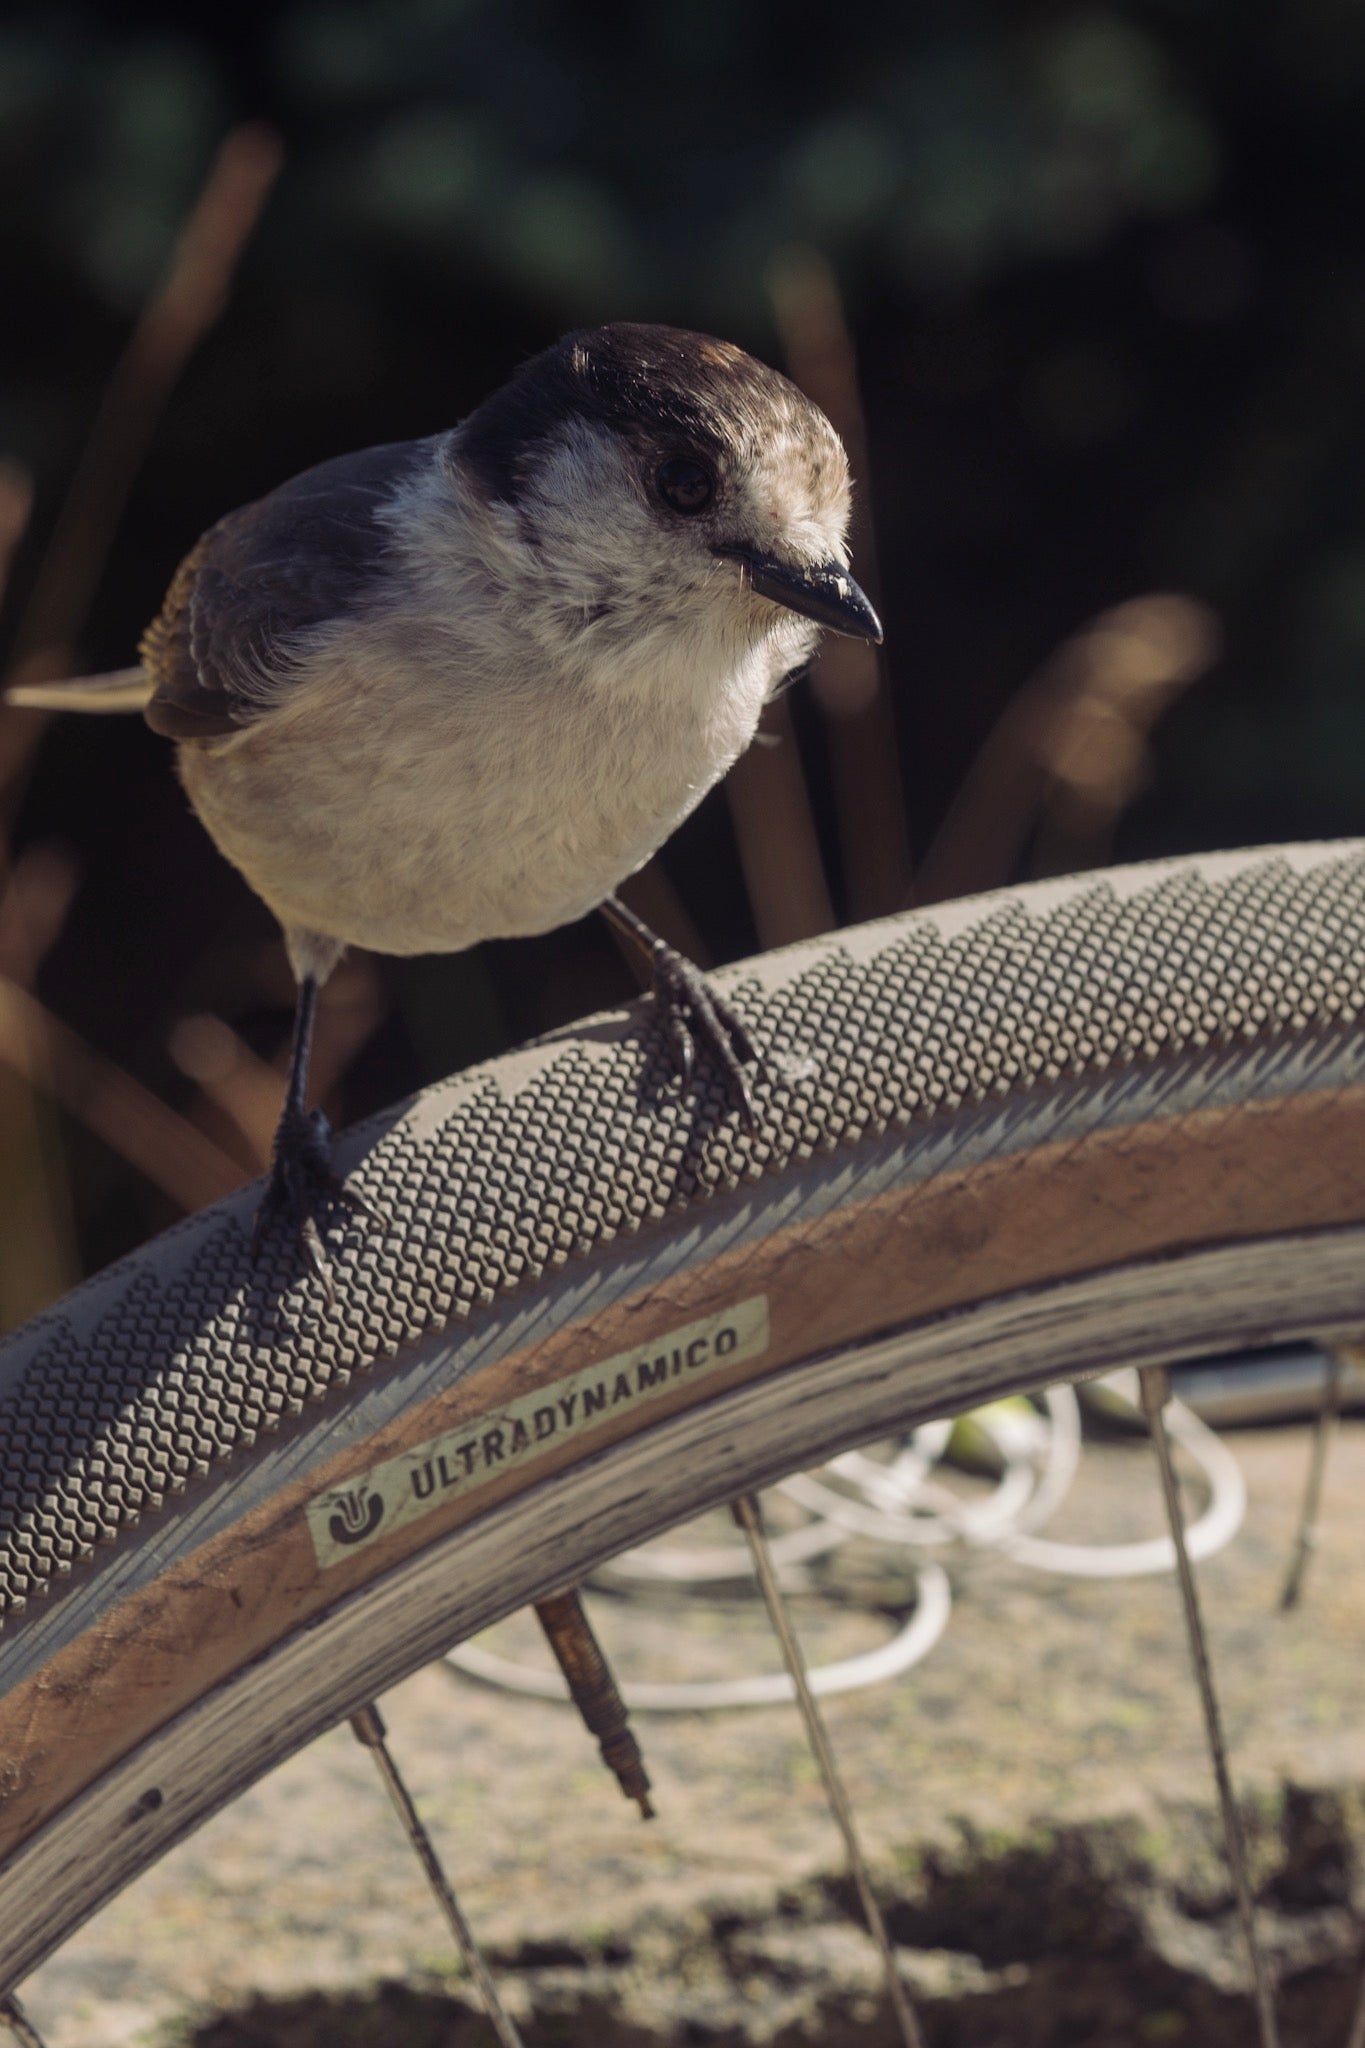 Birding is the new golf.  Bikes is no longer the new golf. - UDCO.  